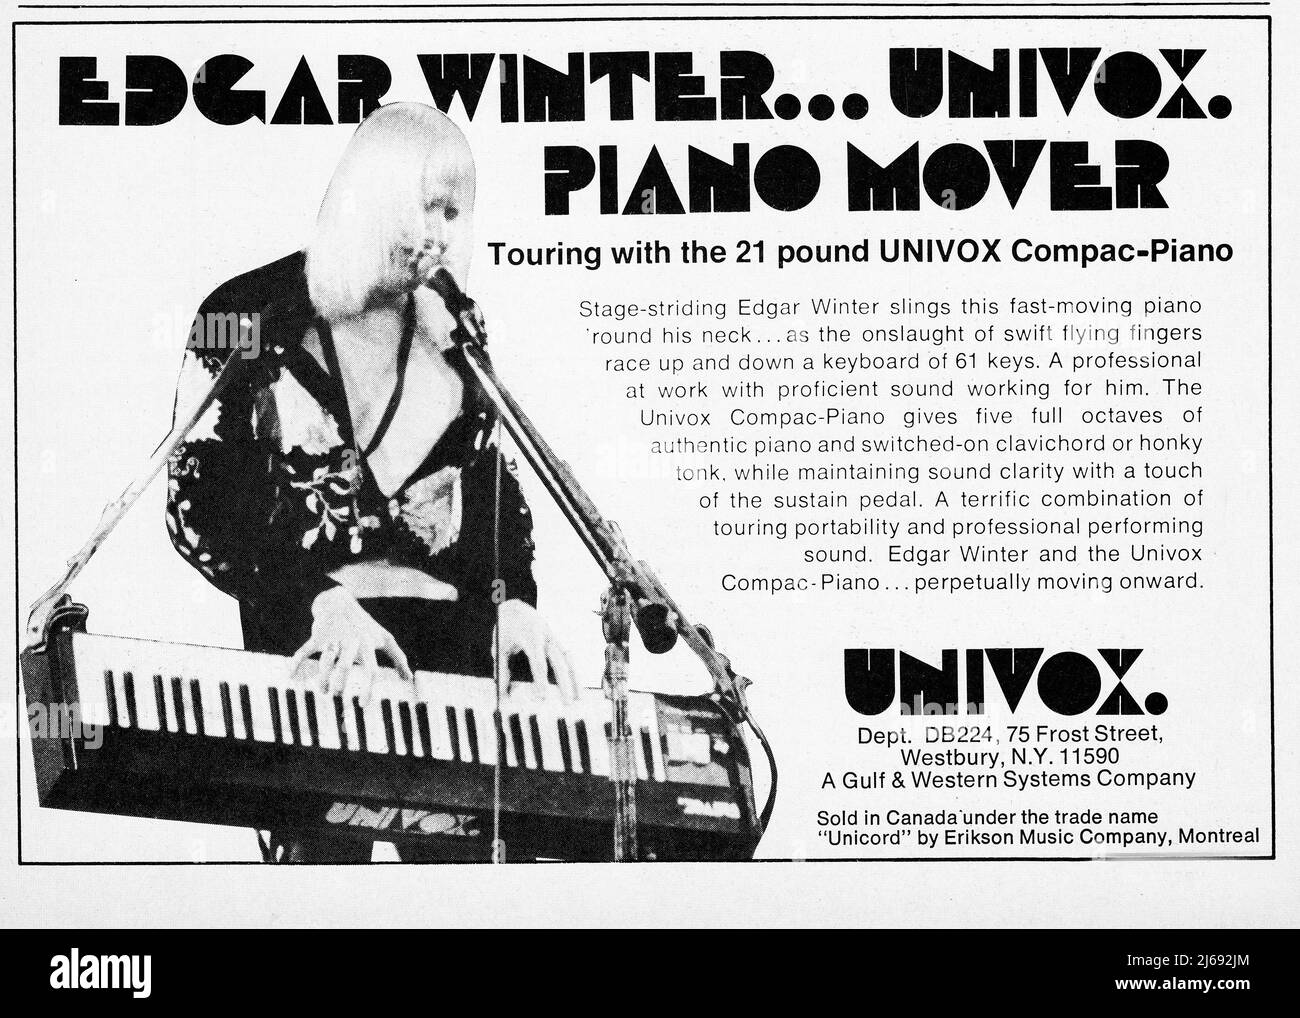 An advertisement for the Univox Compac-Piano featuring legendary blues rock guitarist, Johnny Winter. He was one of the first portable electronic keyboards and Winter invented the strap so as to play it while standing. Stock Photo